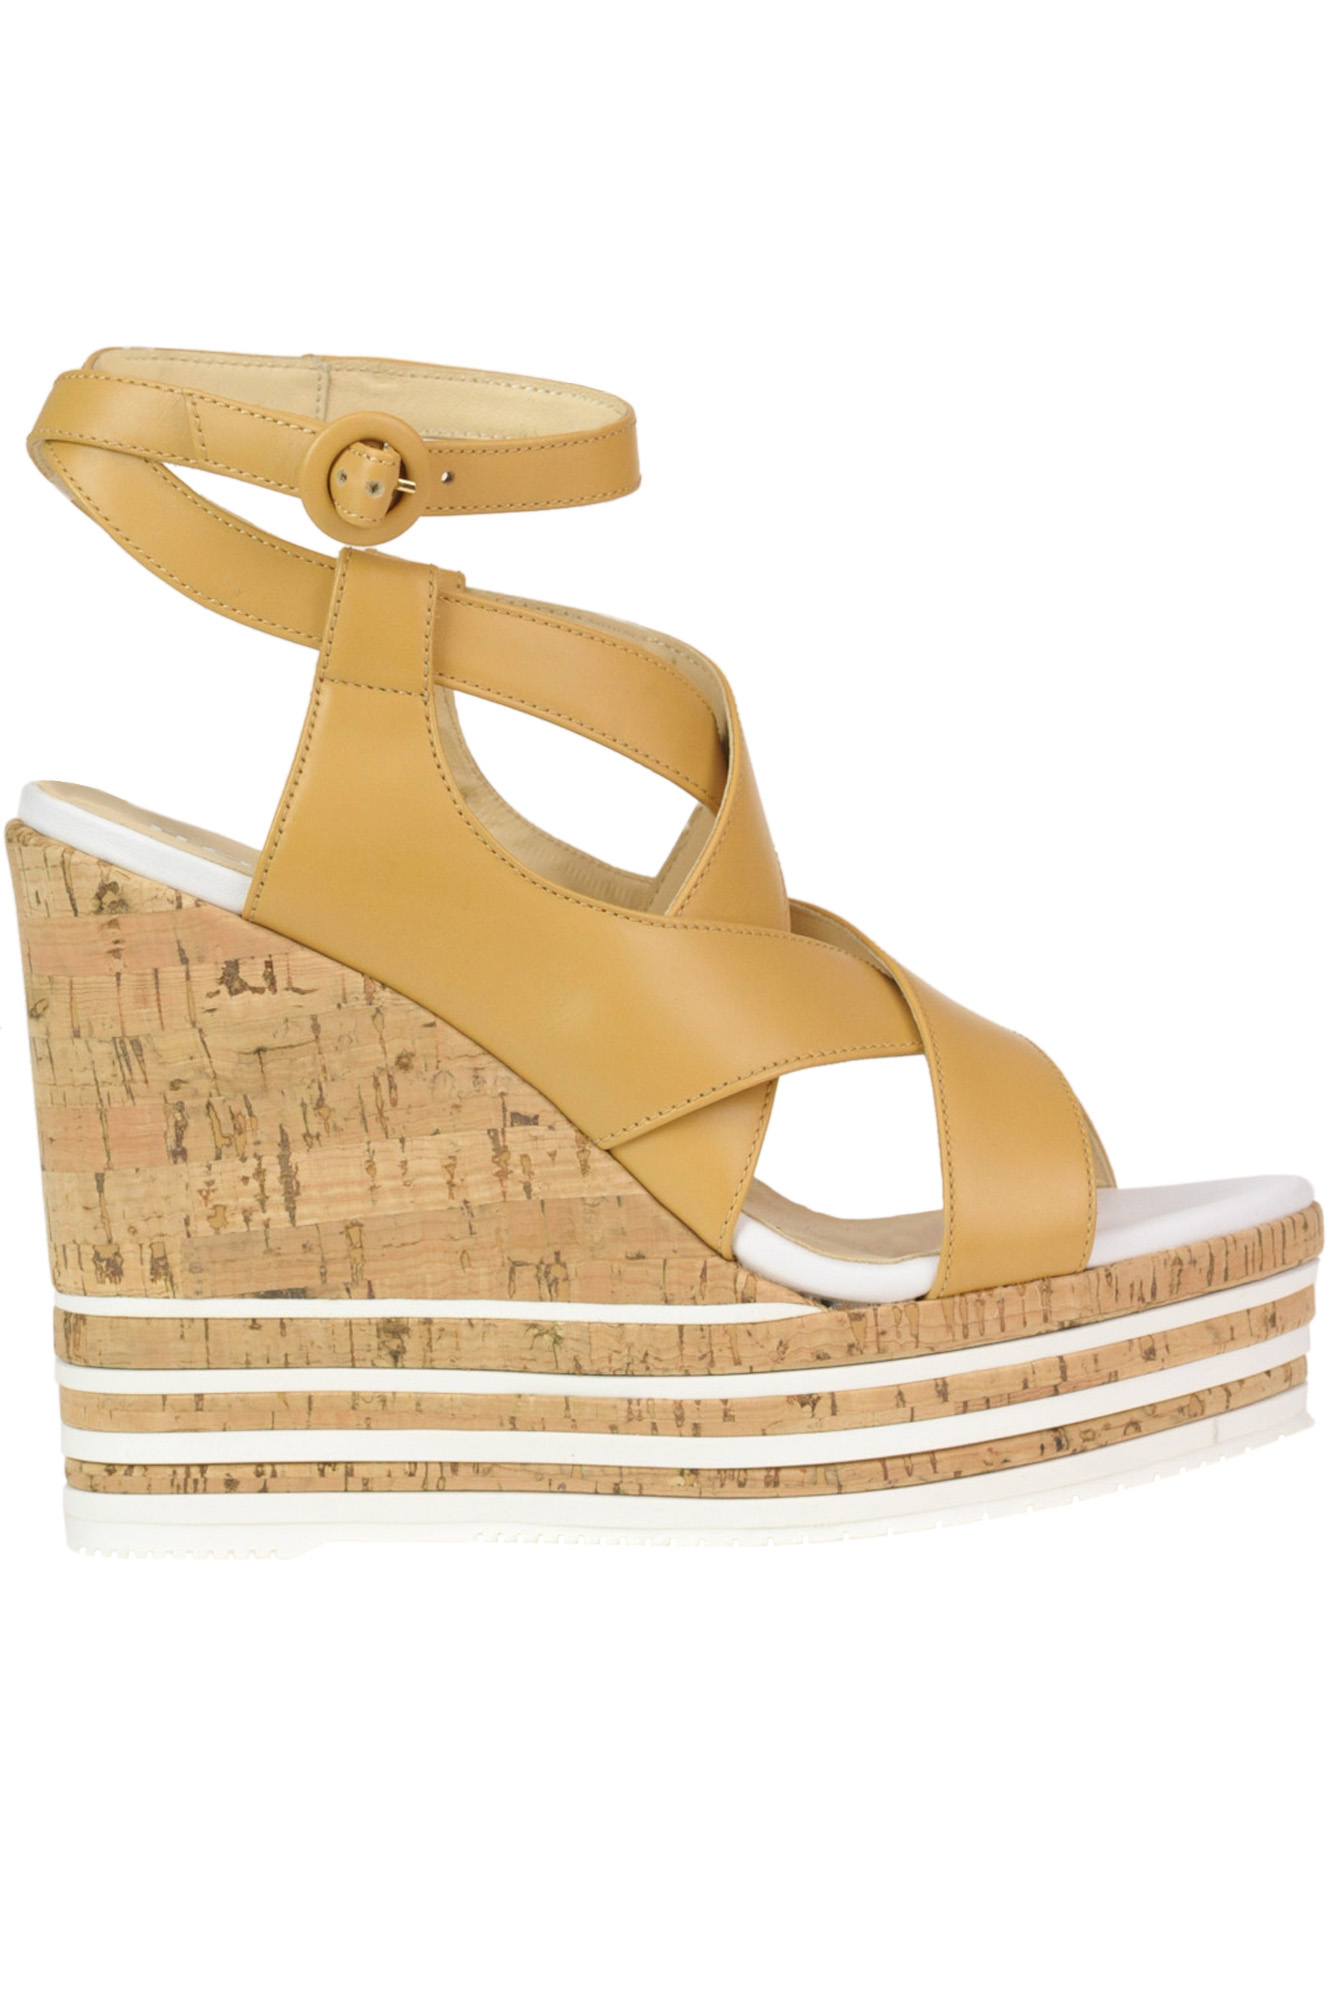 Hogan Leather Wedge Sandals In Light Brown